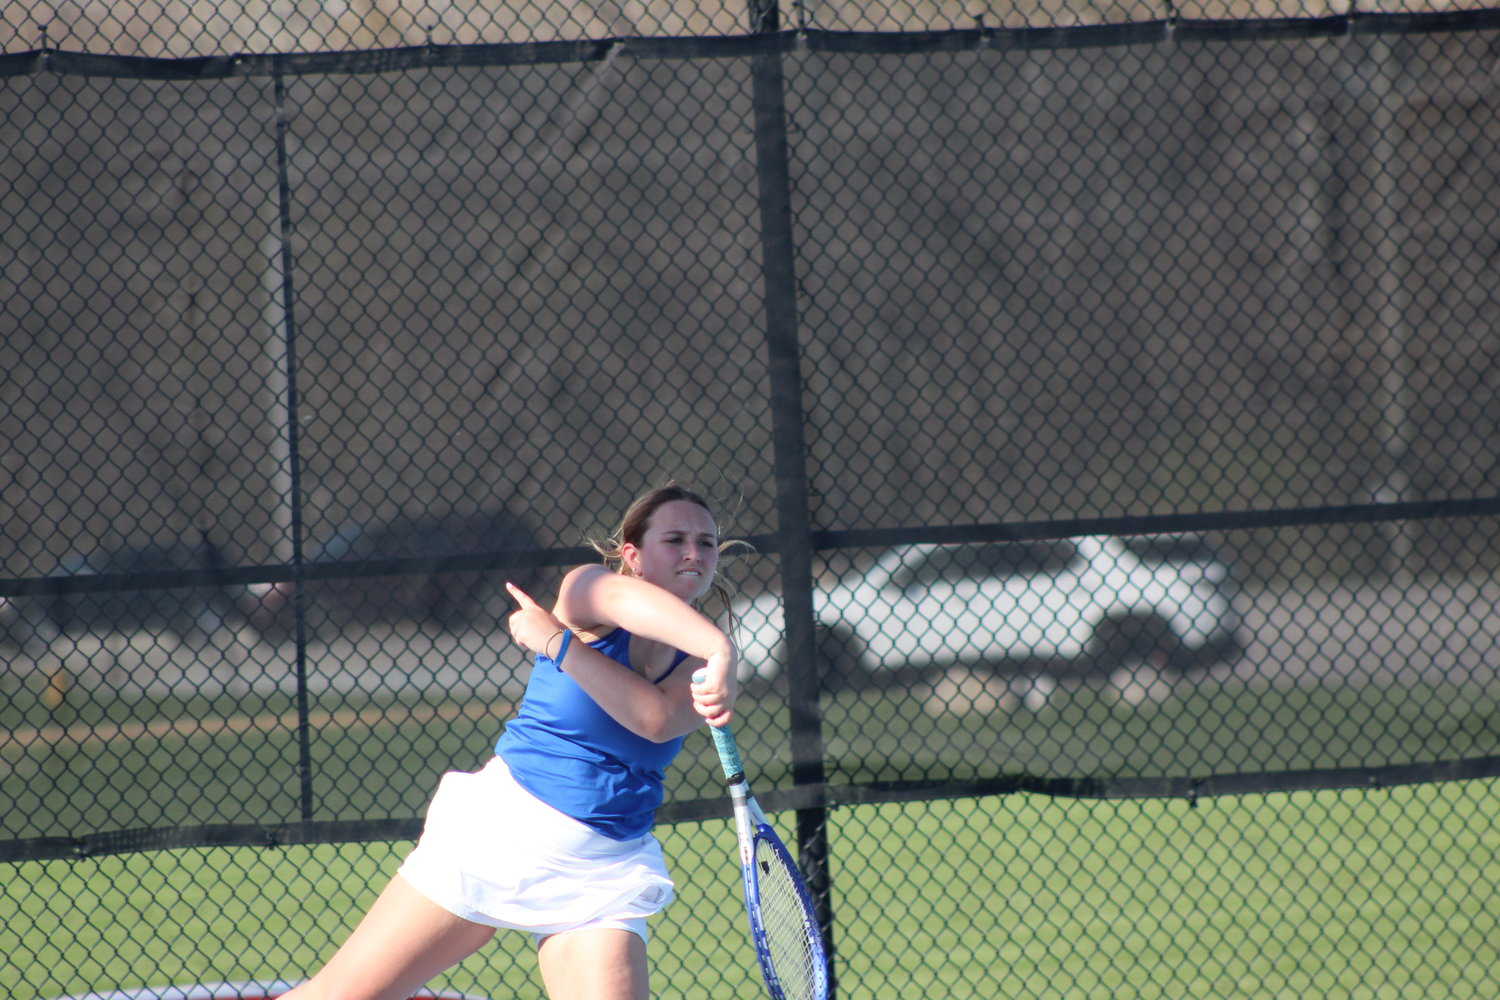 Samantha Rohr defeated Hanna Long at 1 singles for the Athenians.